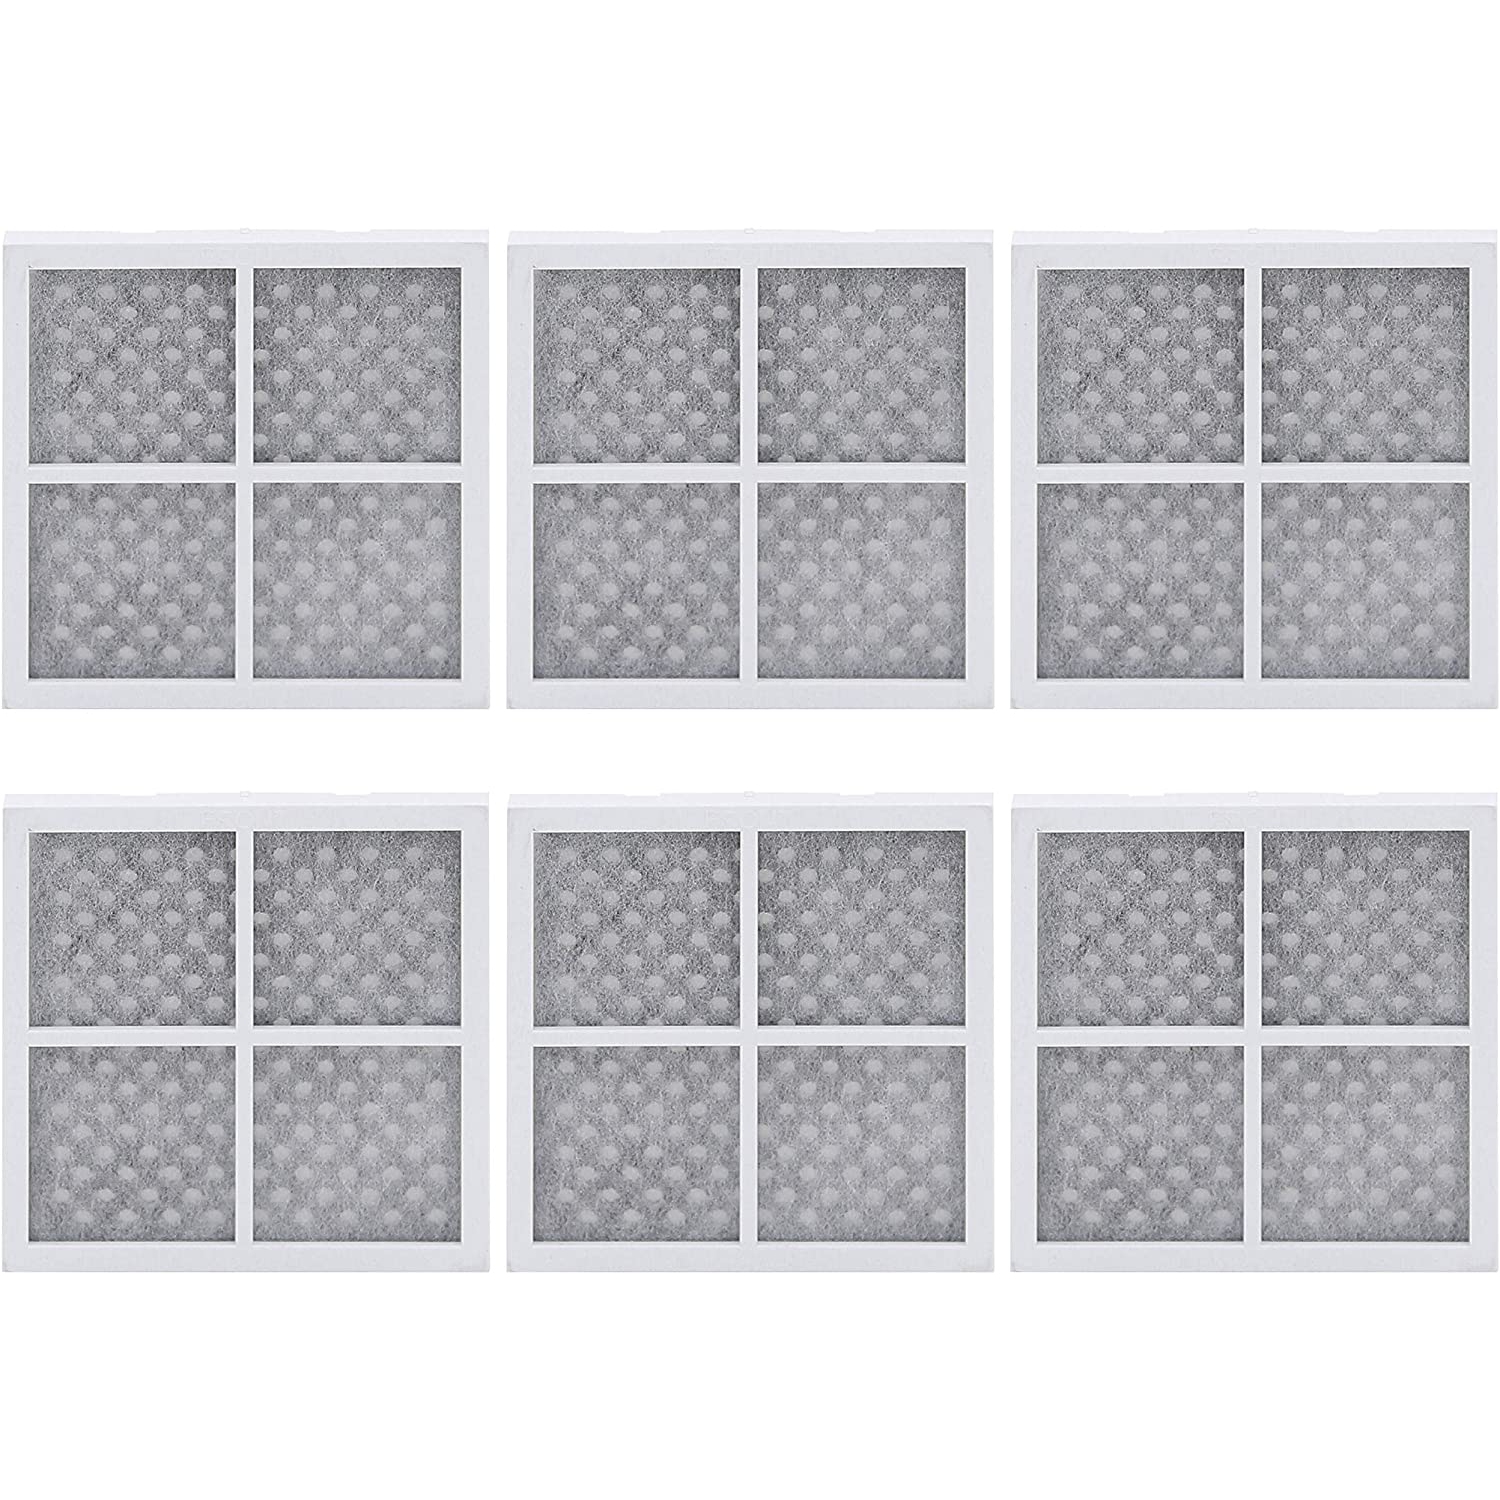 LT120F Air Filters, Replacement for LG LT120F, ADQ73214404, 469918, Refrigerator Air Filters, Fresh